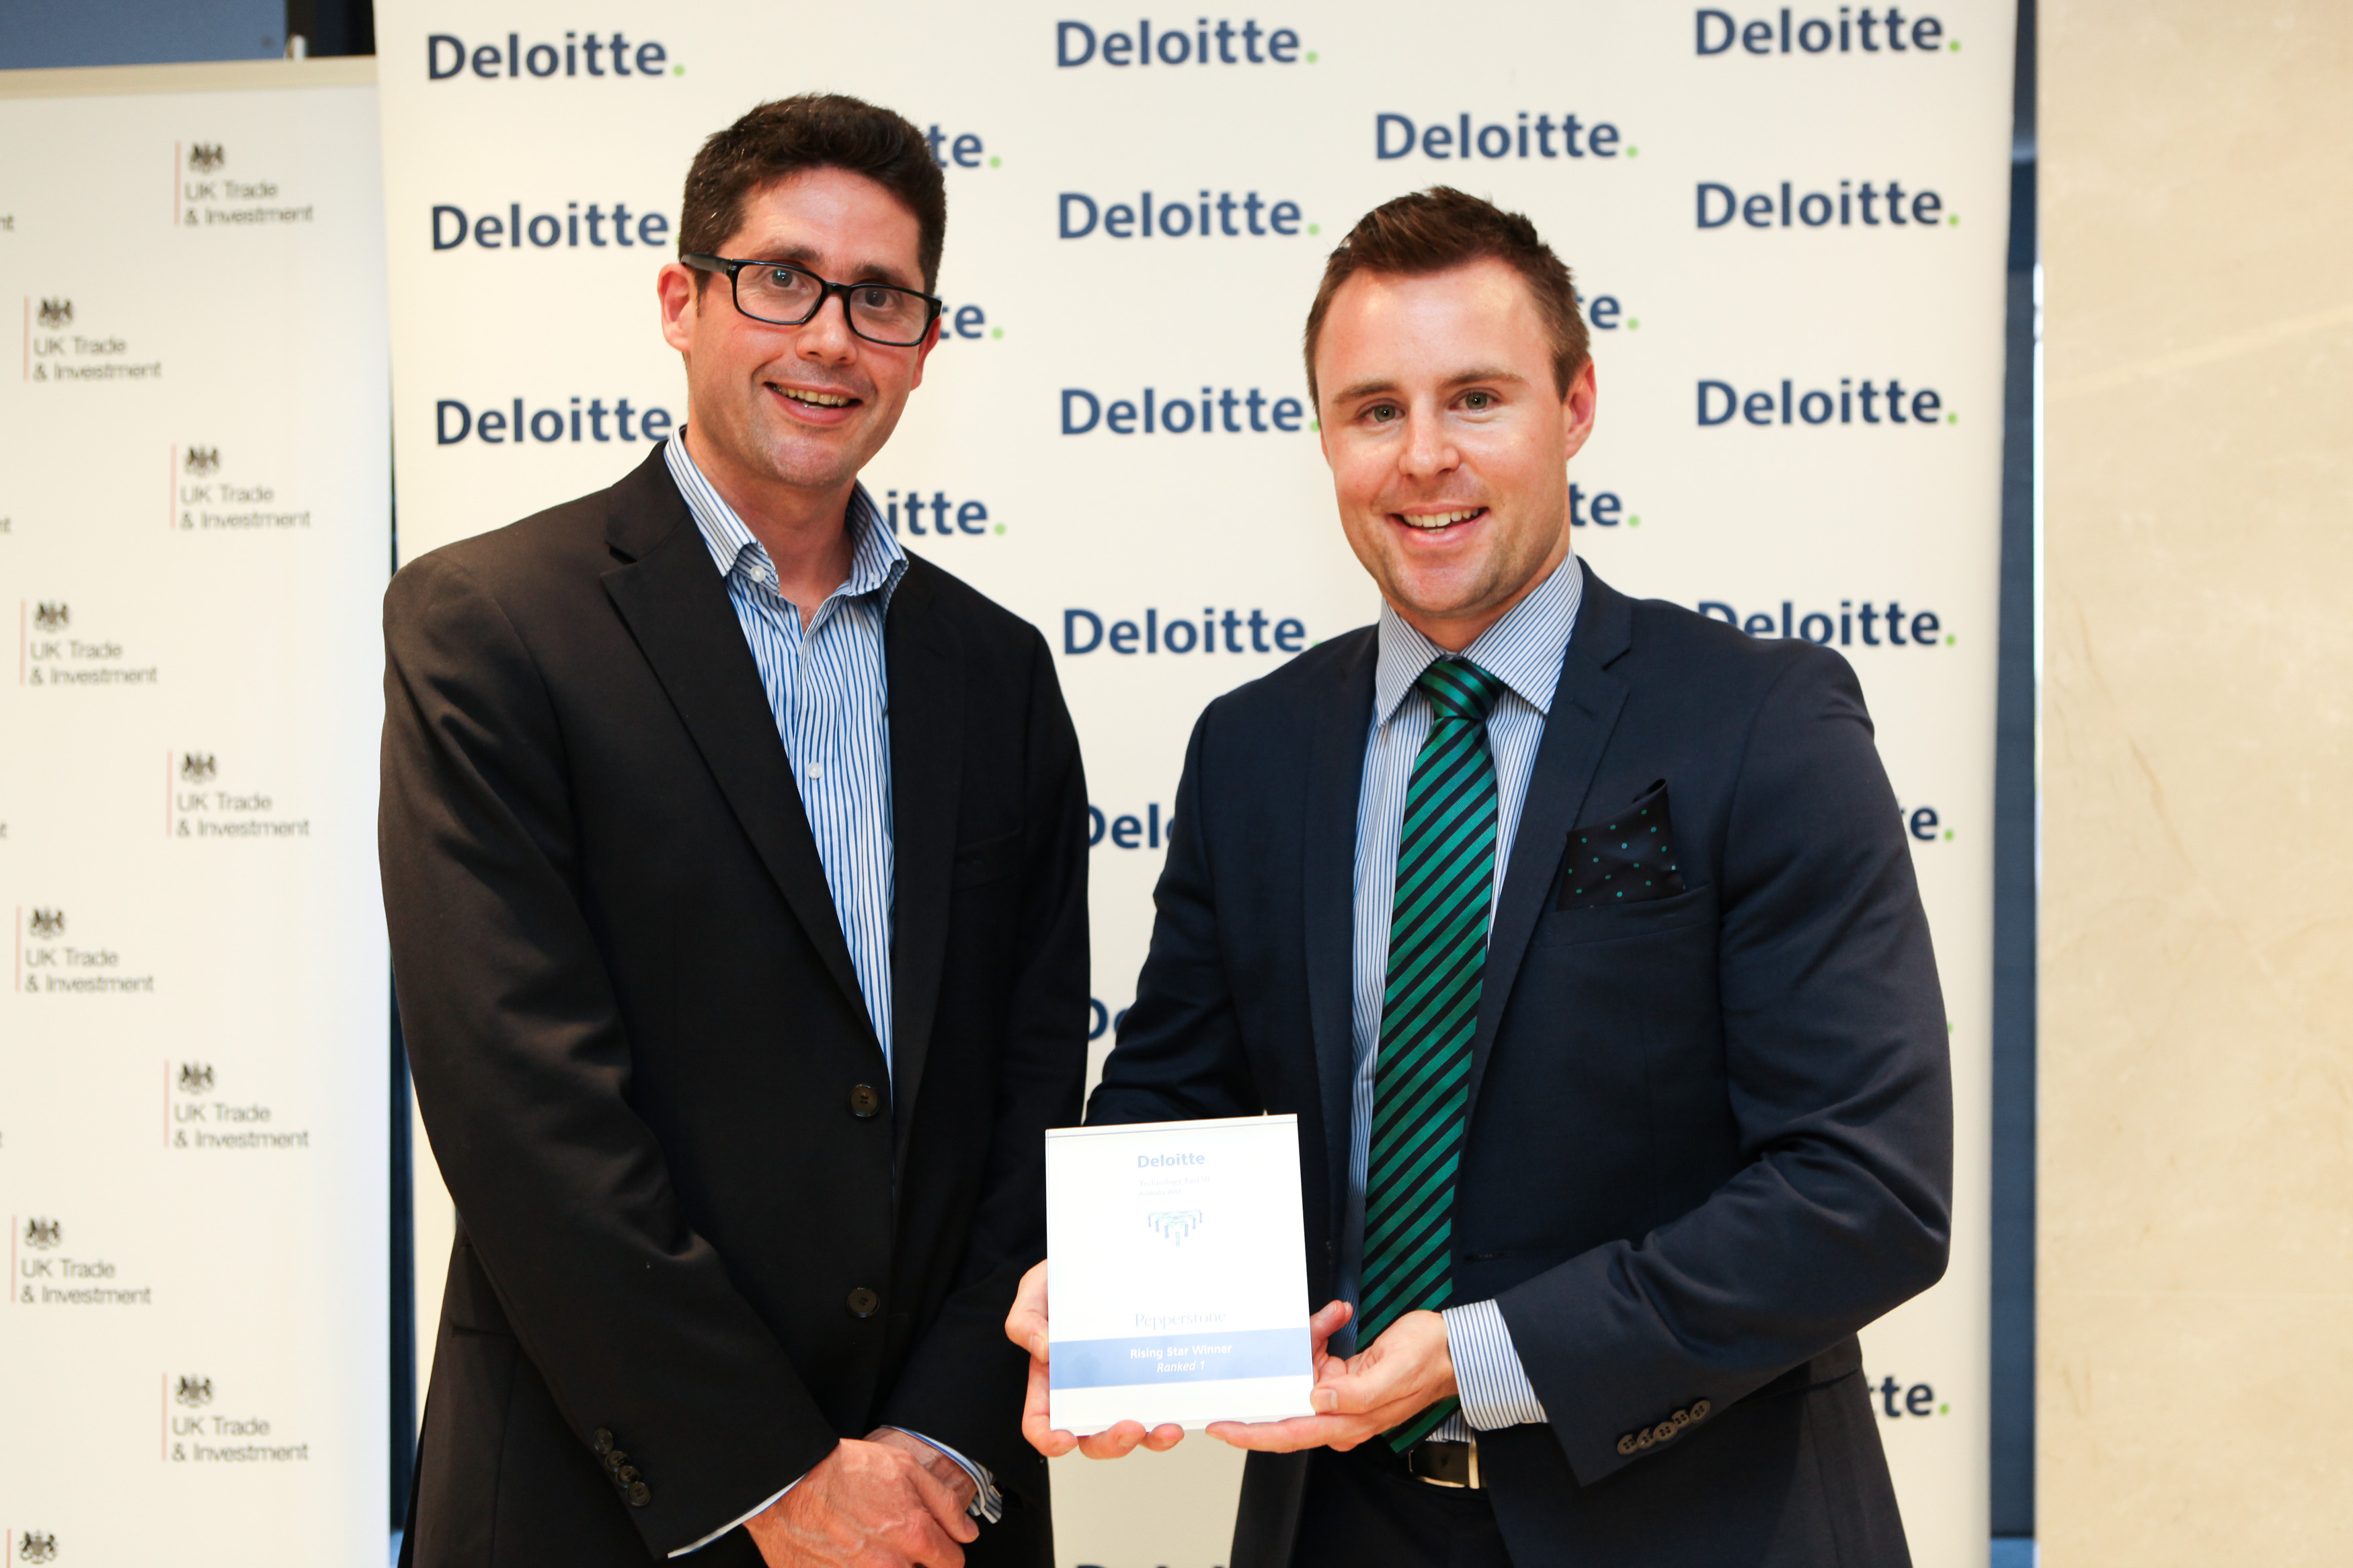 Pepperstone CEO Owen Kerr collecting the Award from Deloitte